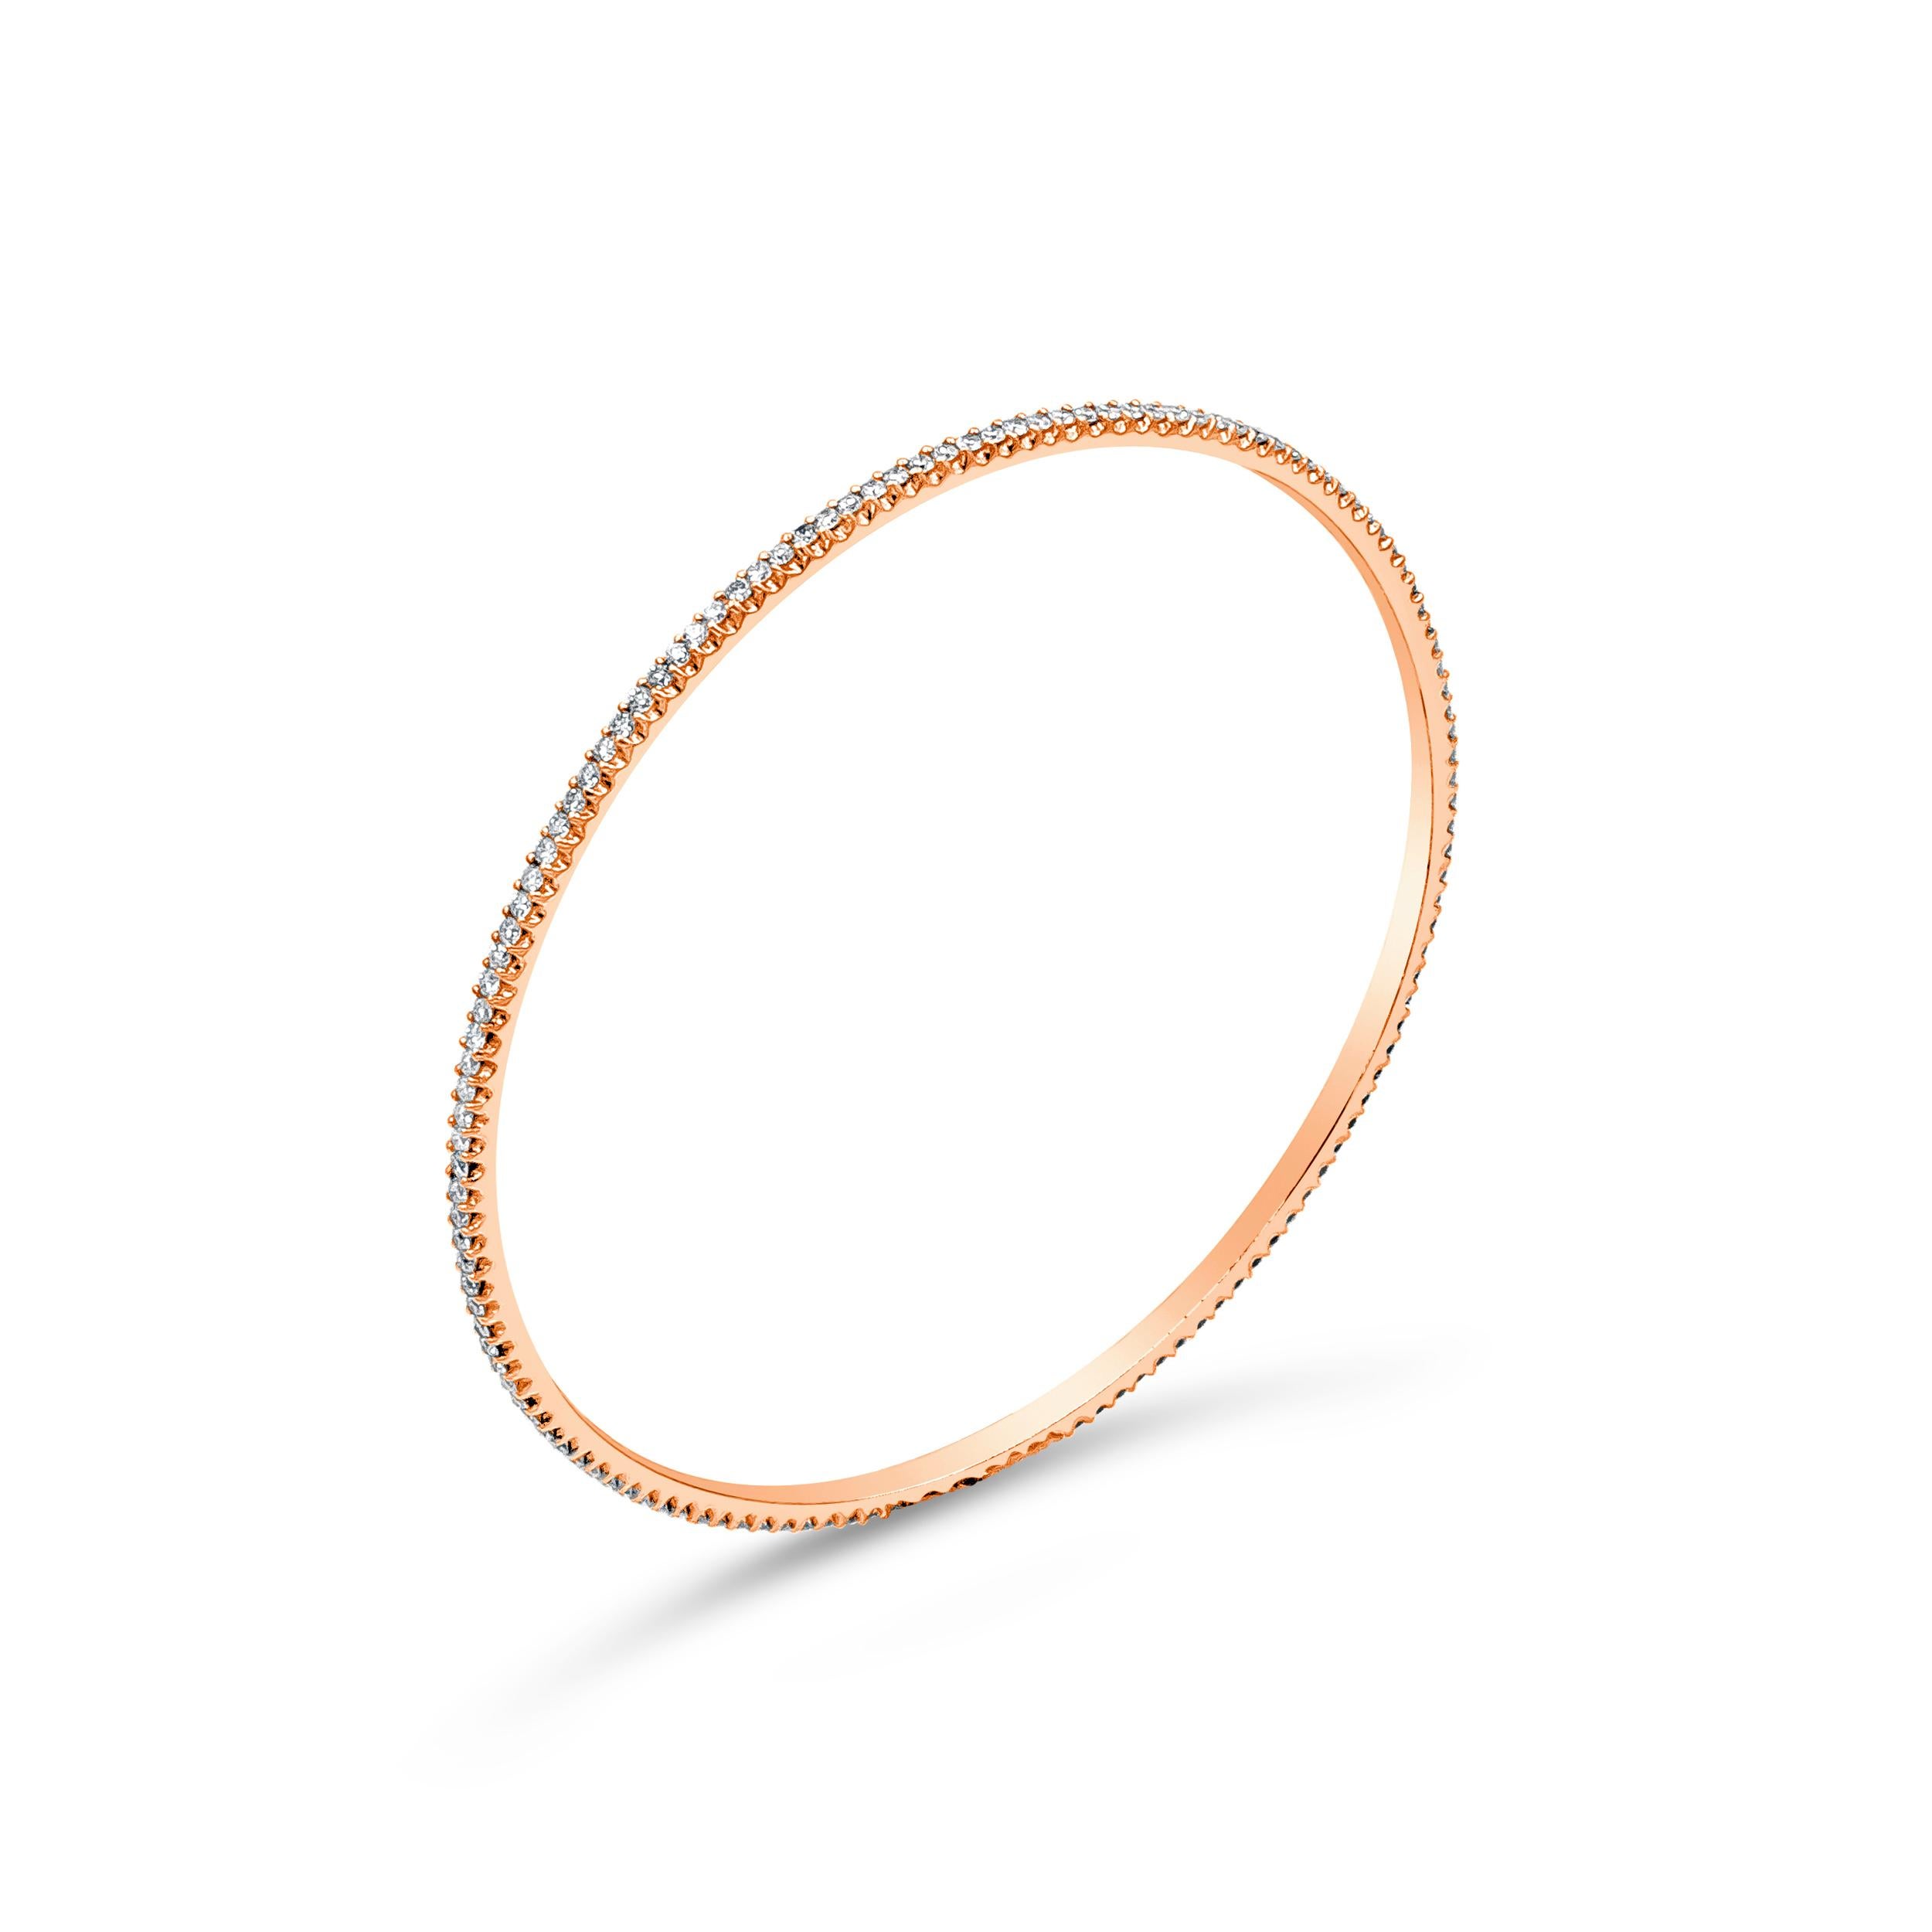 A classic bangle bracelet encrusted with round brilliant diamonds. Diamonds weigh 1.78 carats total. Made in 18 karat rose gold. 

Roman Malakov is a custom house, specializing in creating anything you can imagine. If you would like to receive a